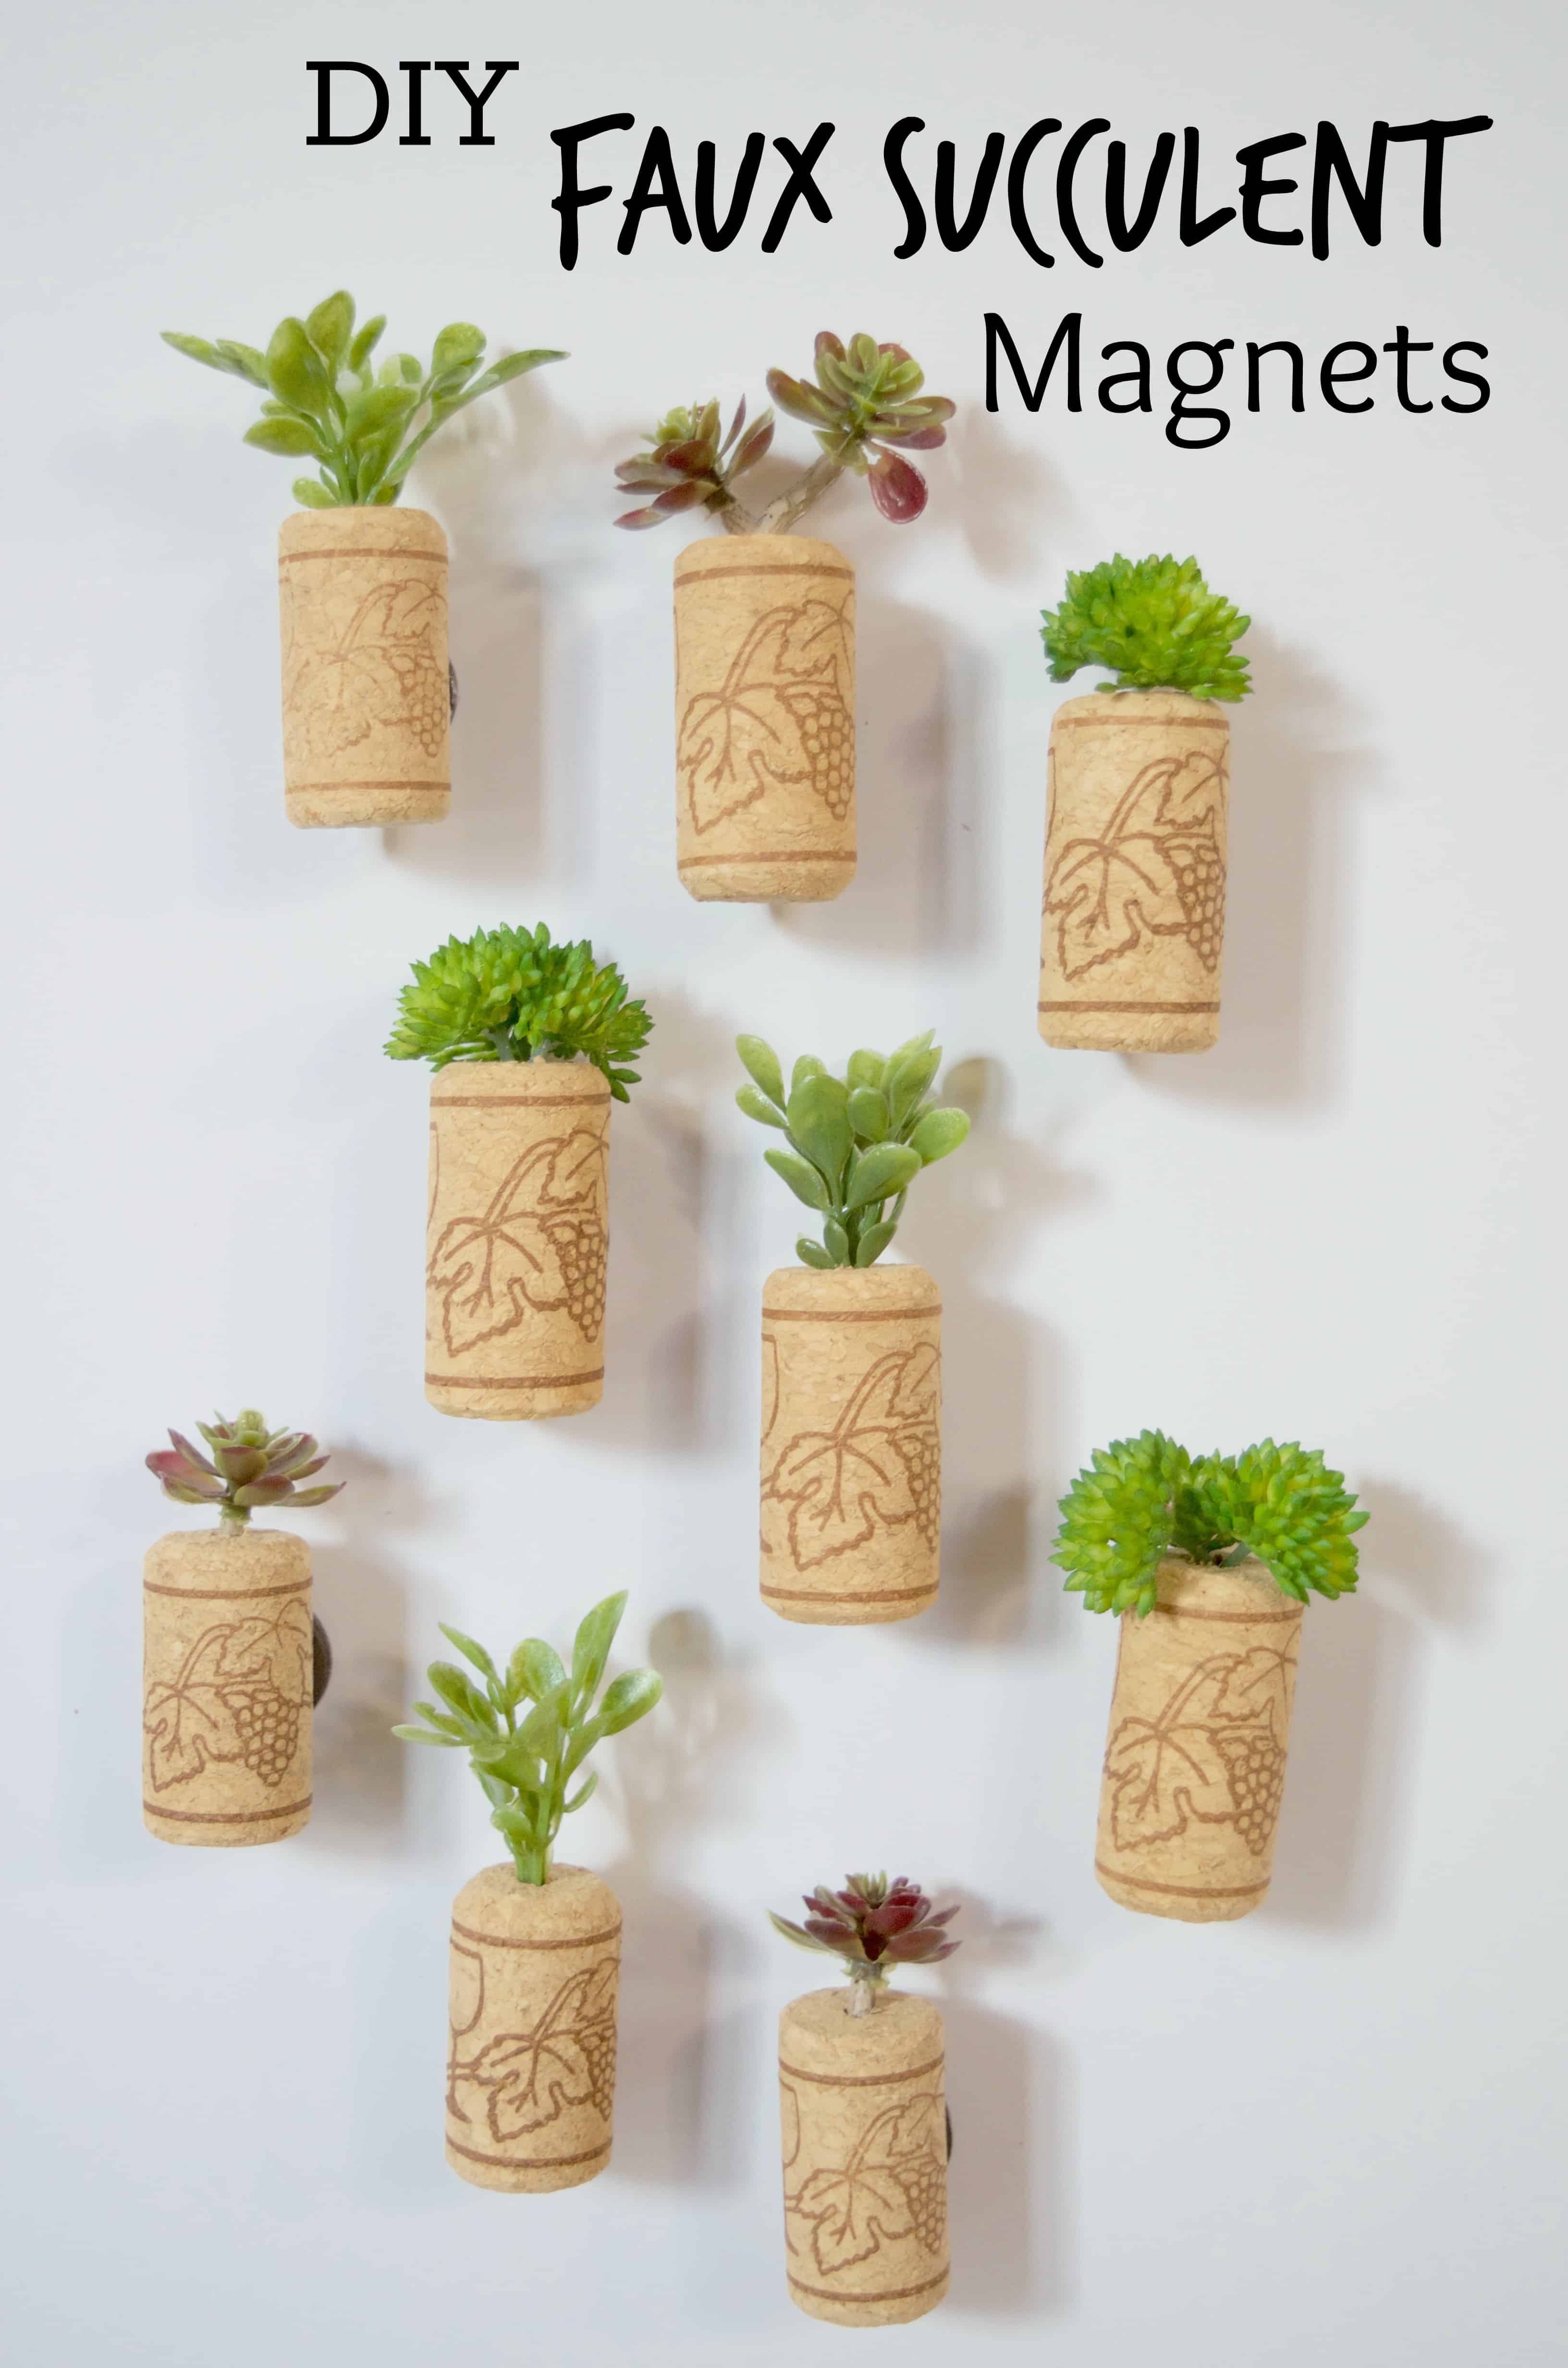 How to Make Fake Succulent Magnets Home Decor Tutorial